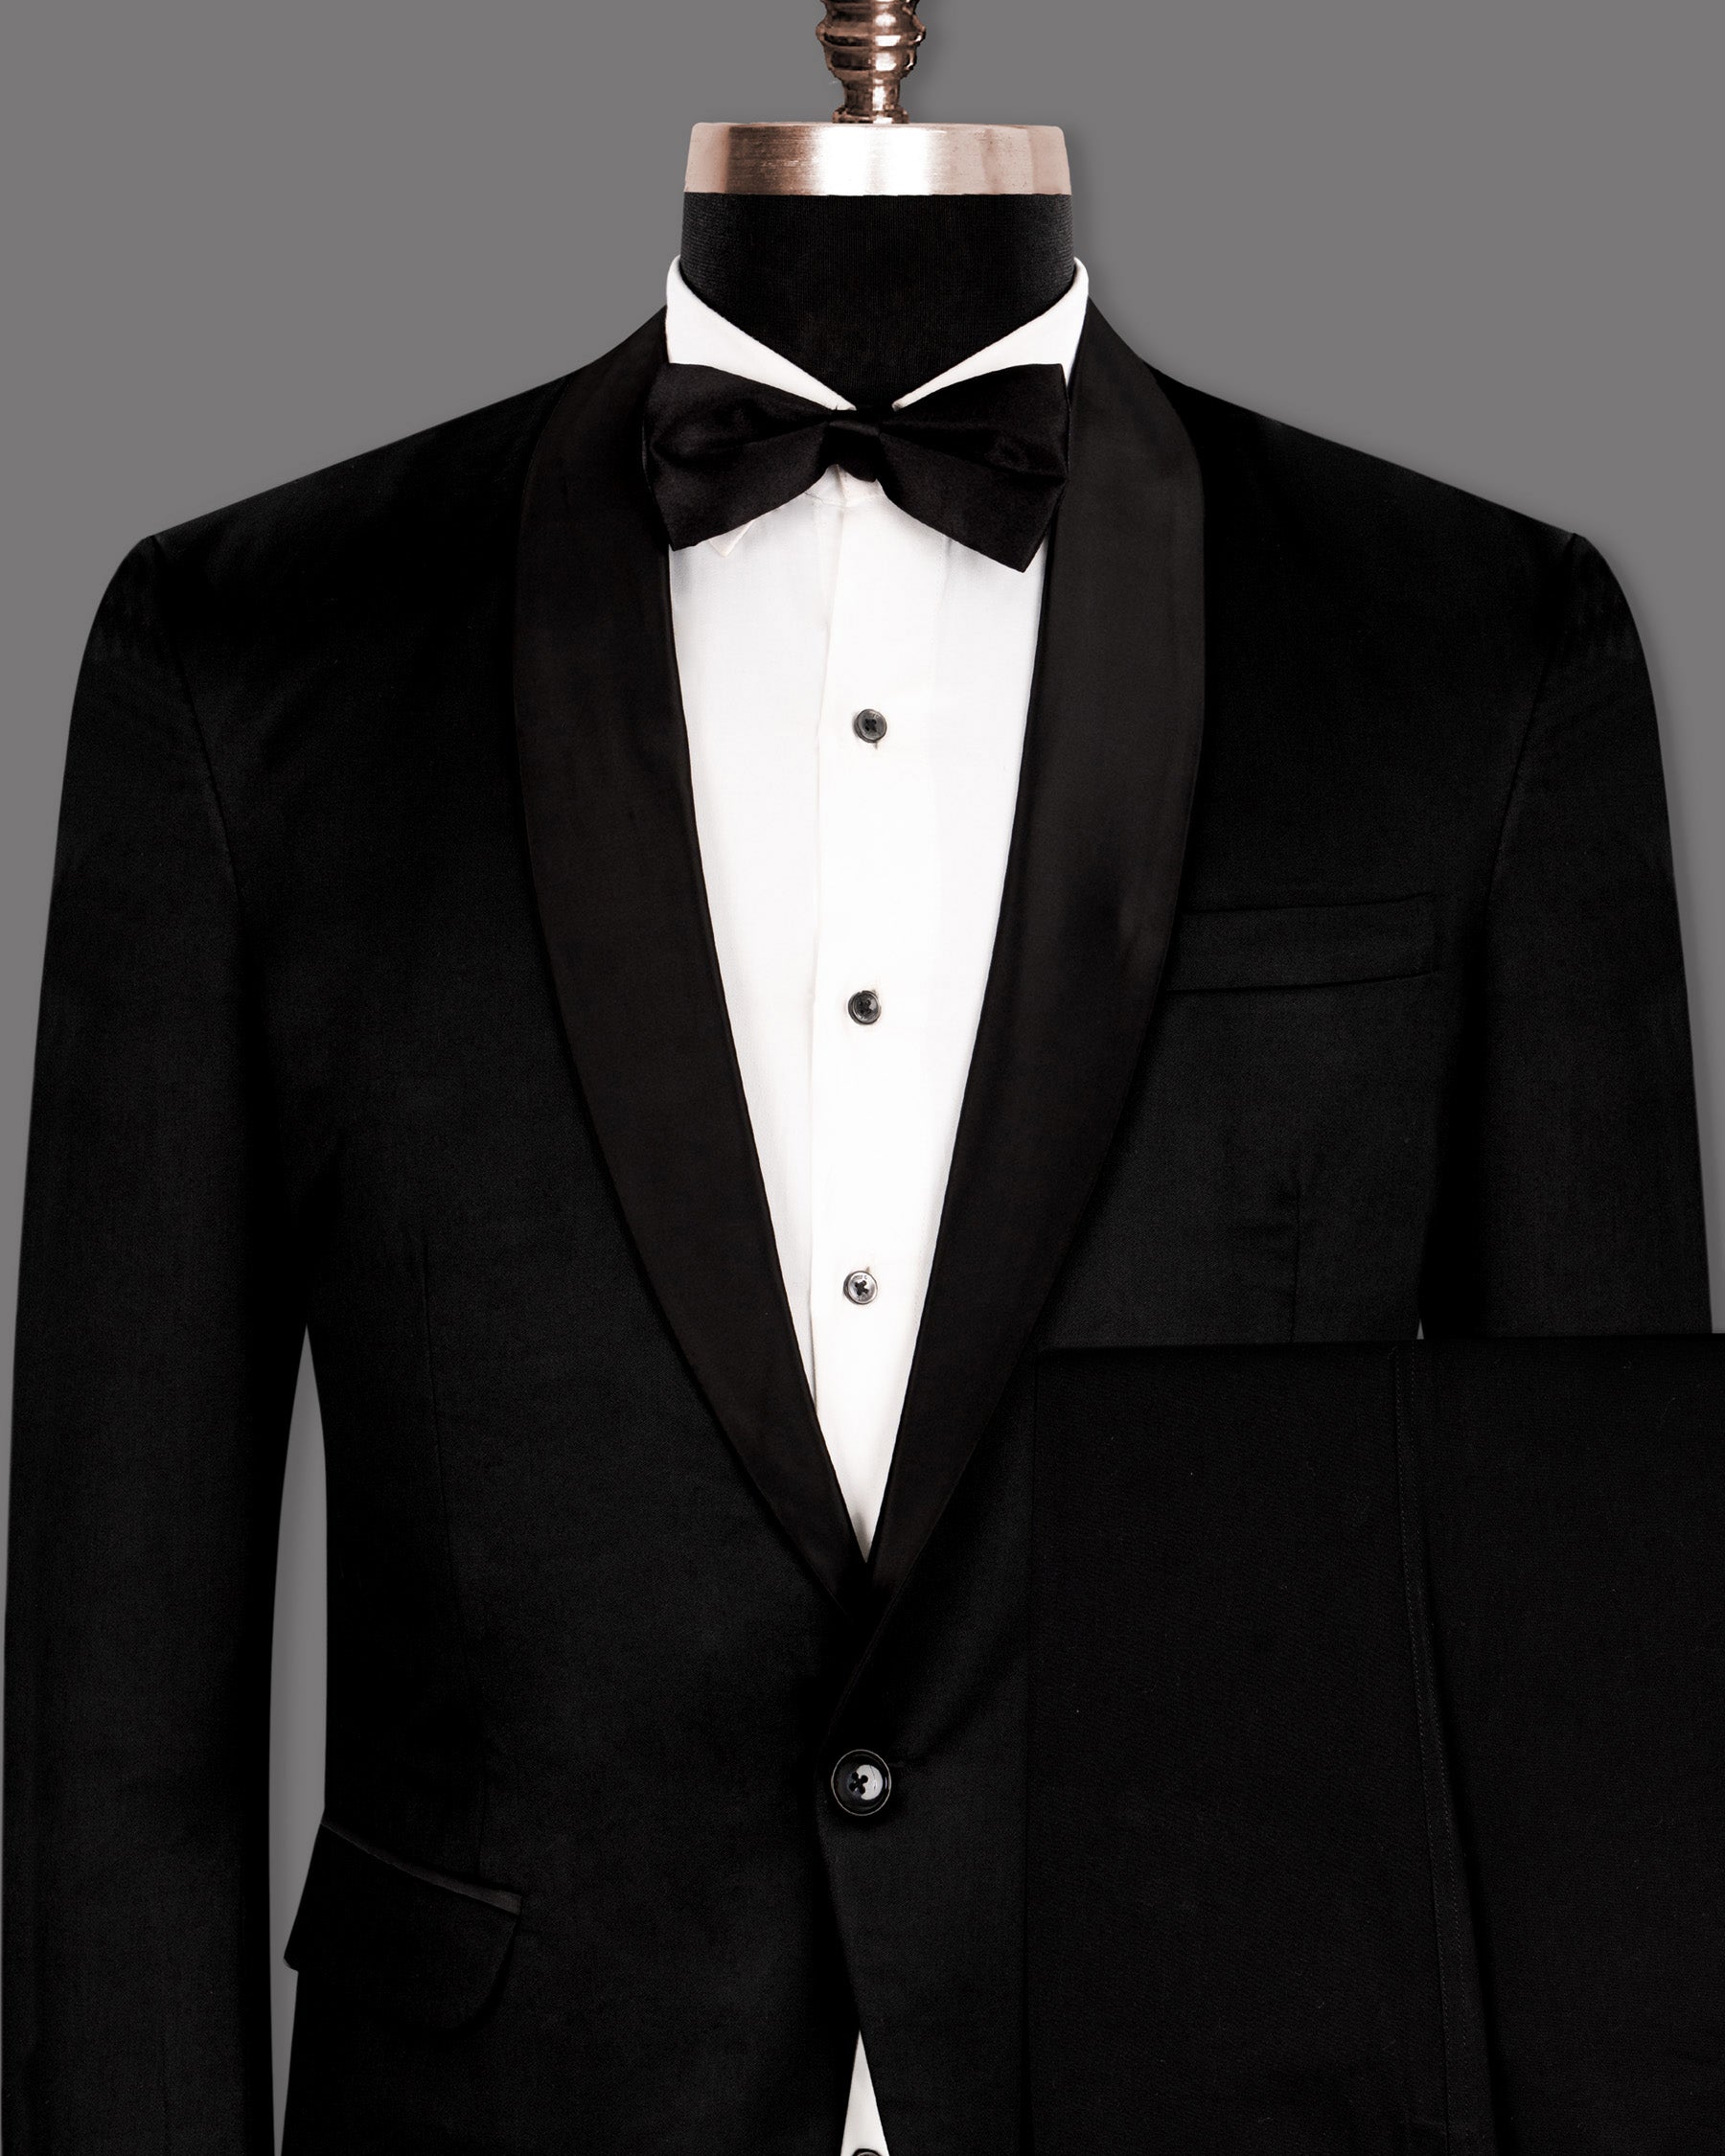 tuxedo with black shirt royal blue ties - Google Search